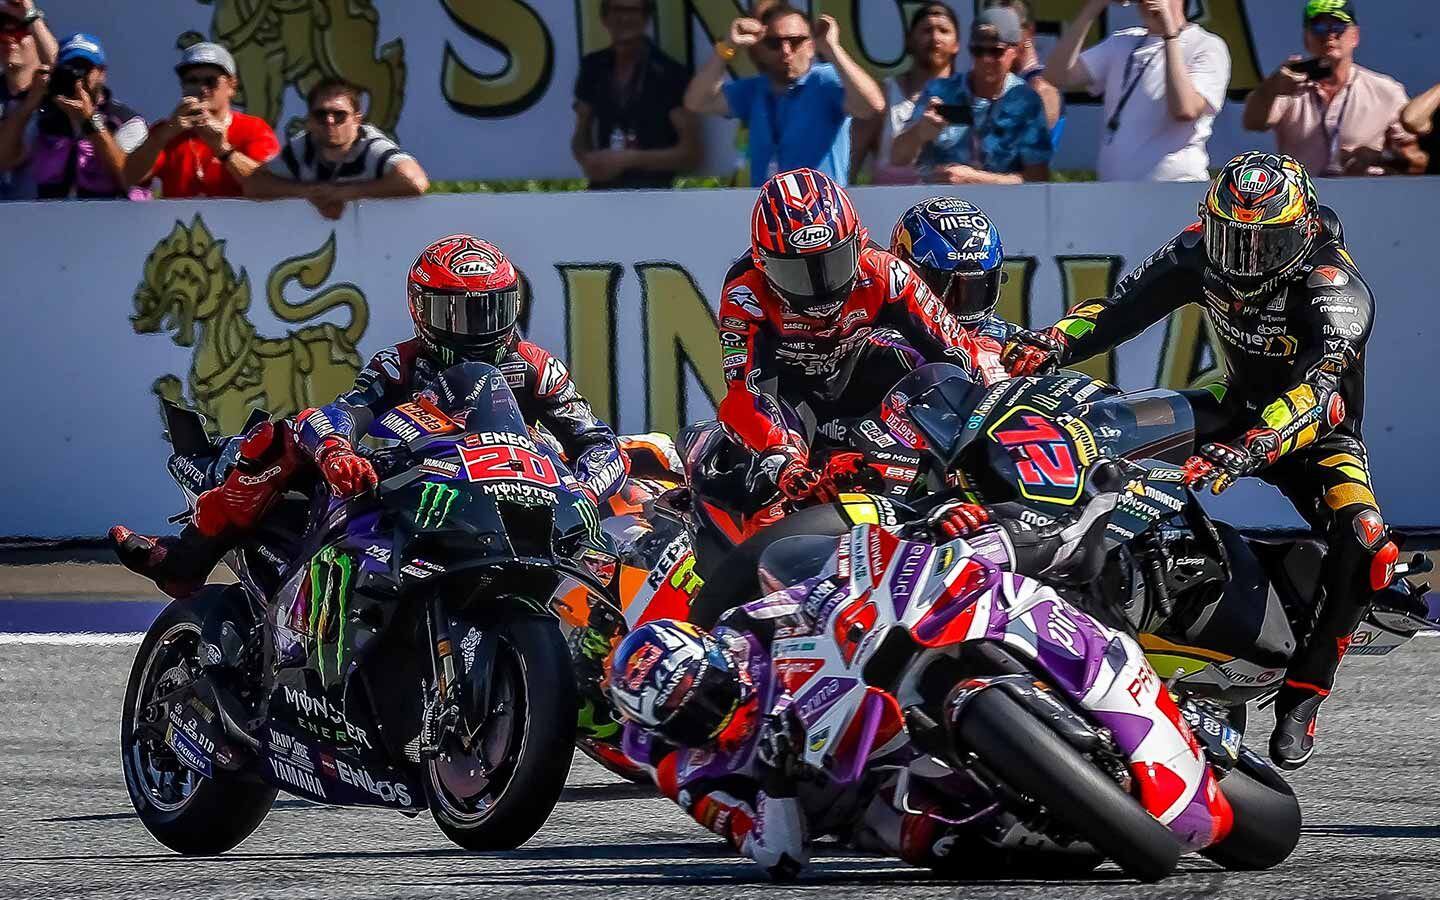 A smashup at the start of the sprint race gave Brad Binder and Bagnaia space from the pack.